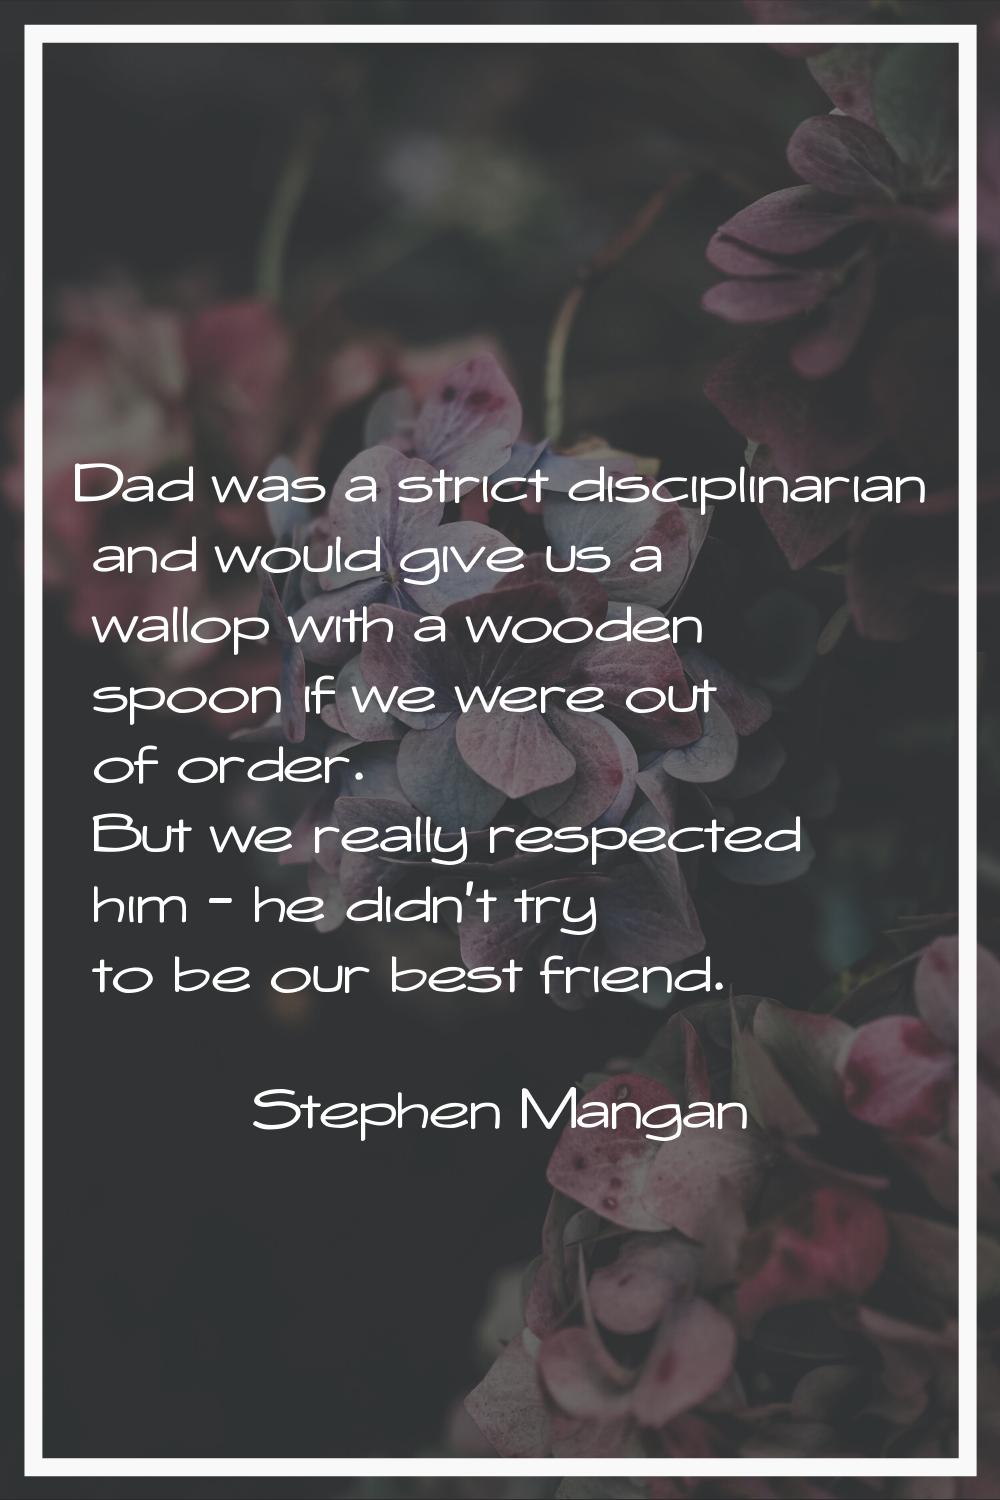 Dad was a strict disciplinarian and would give us a wallop with a wooden spoon if we were out of or